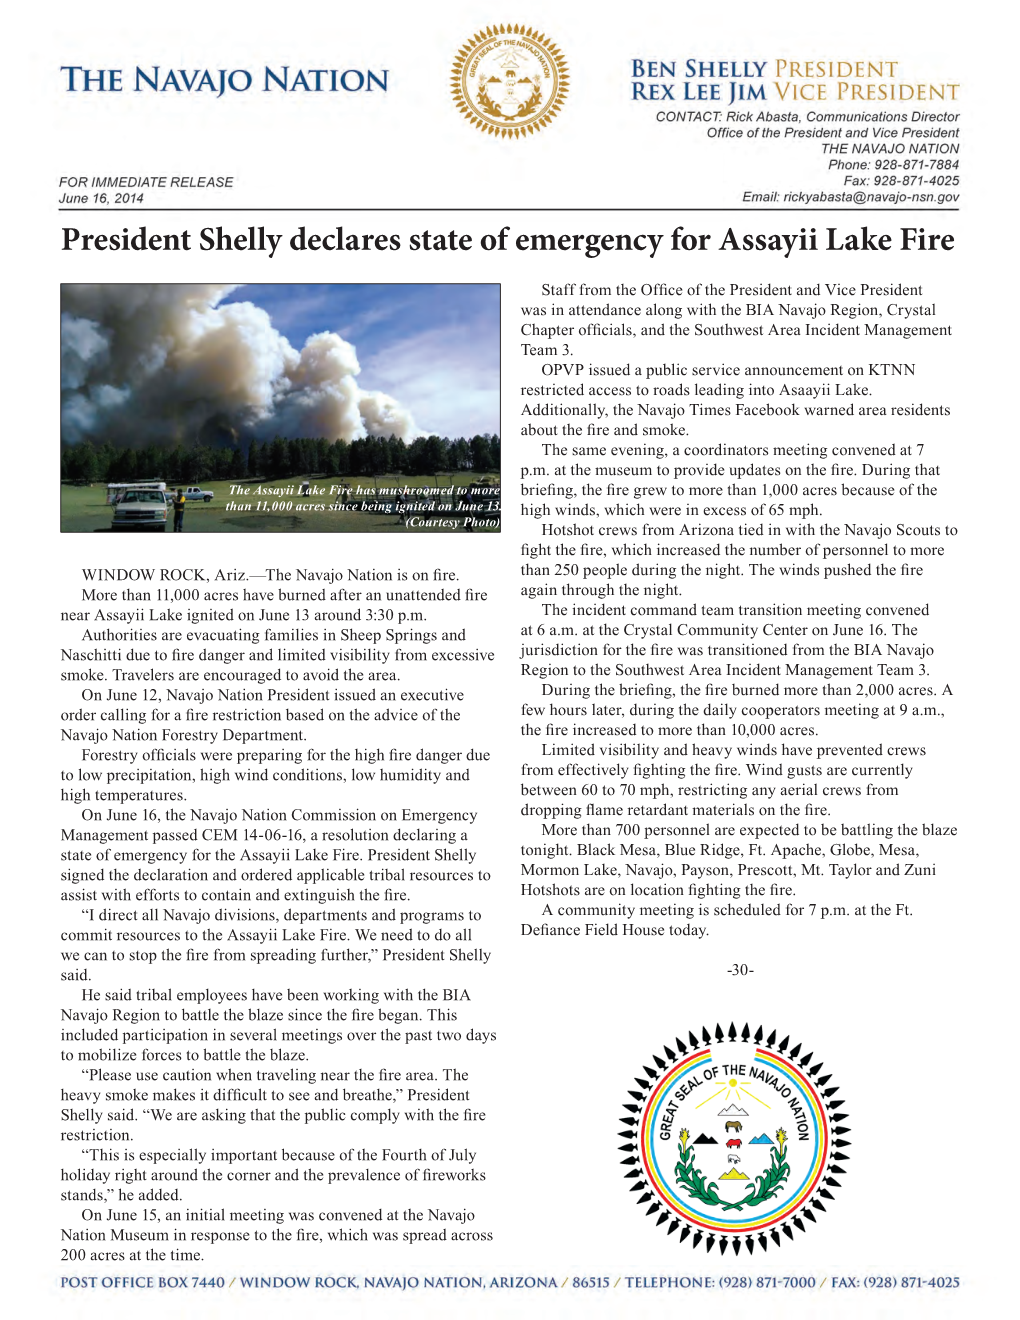 President Shelly Declares State of Emergency for Assayii Lake Fire